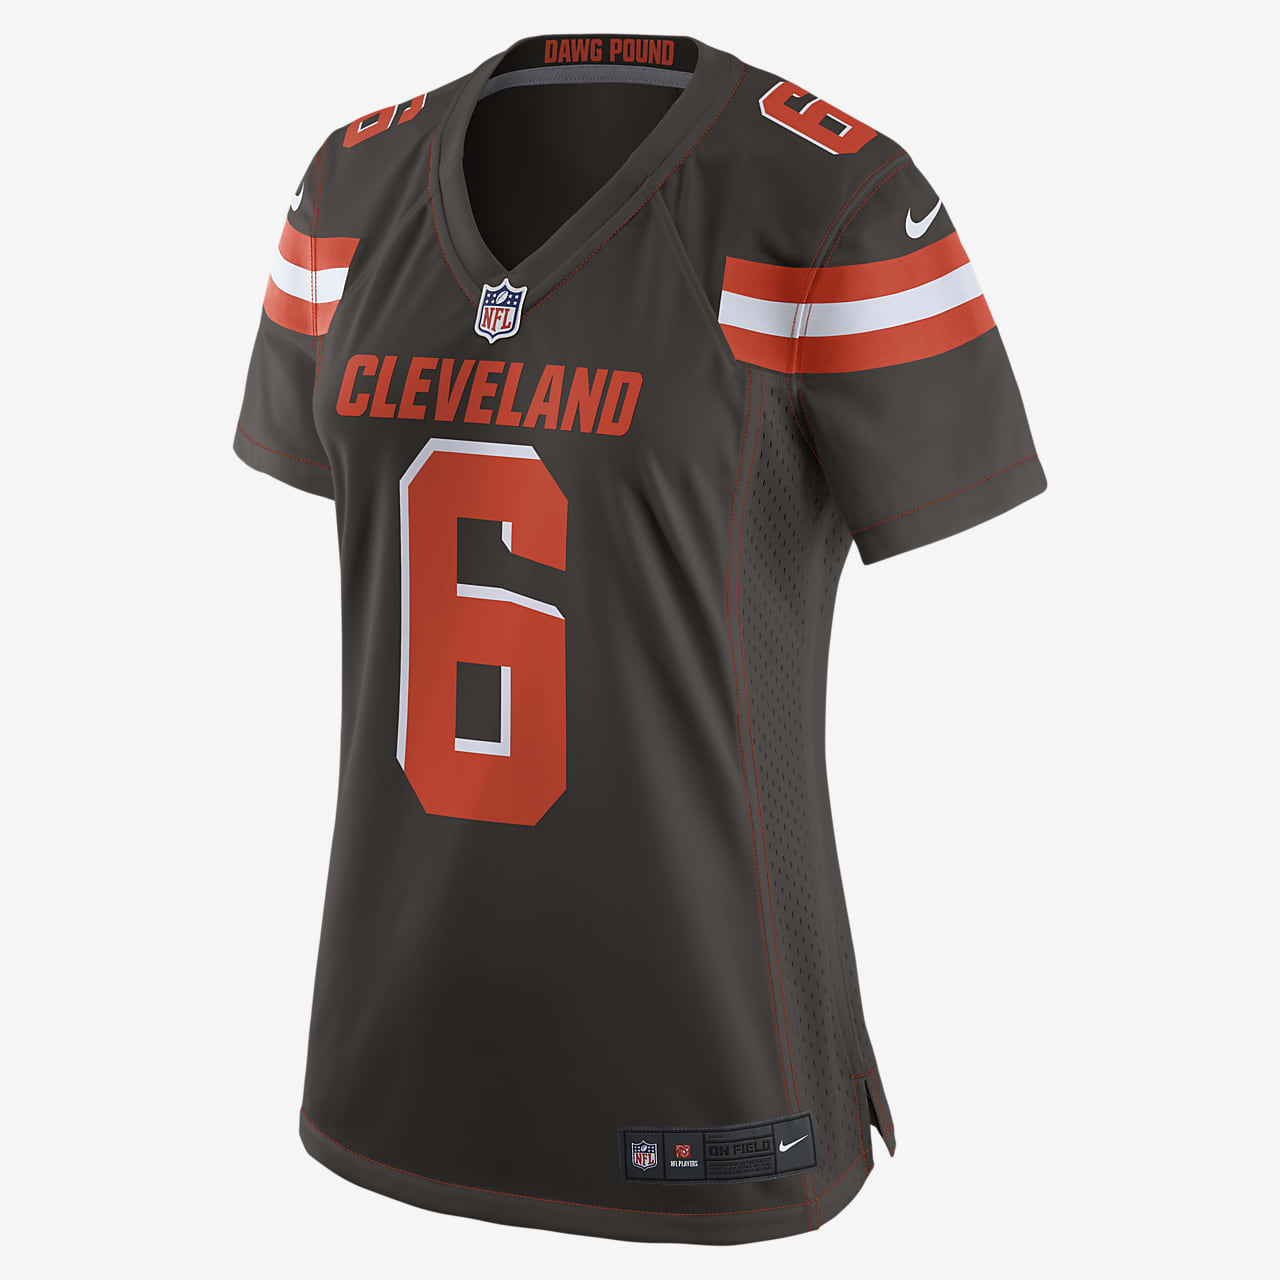 cleveland browns mayfield jersey